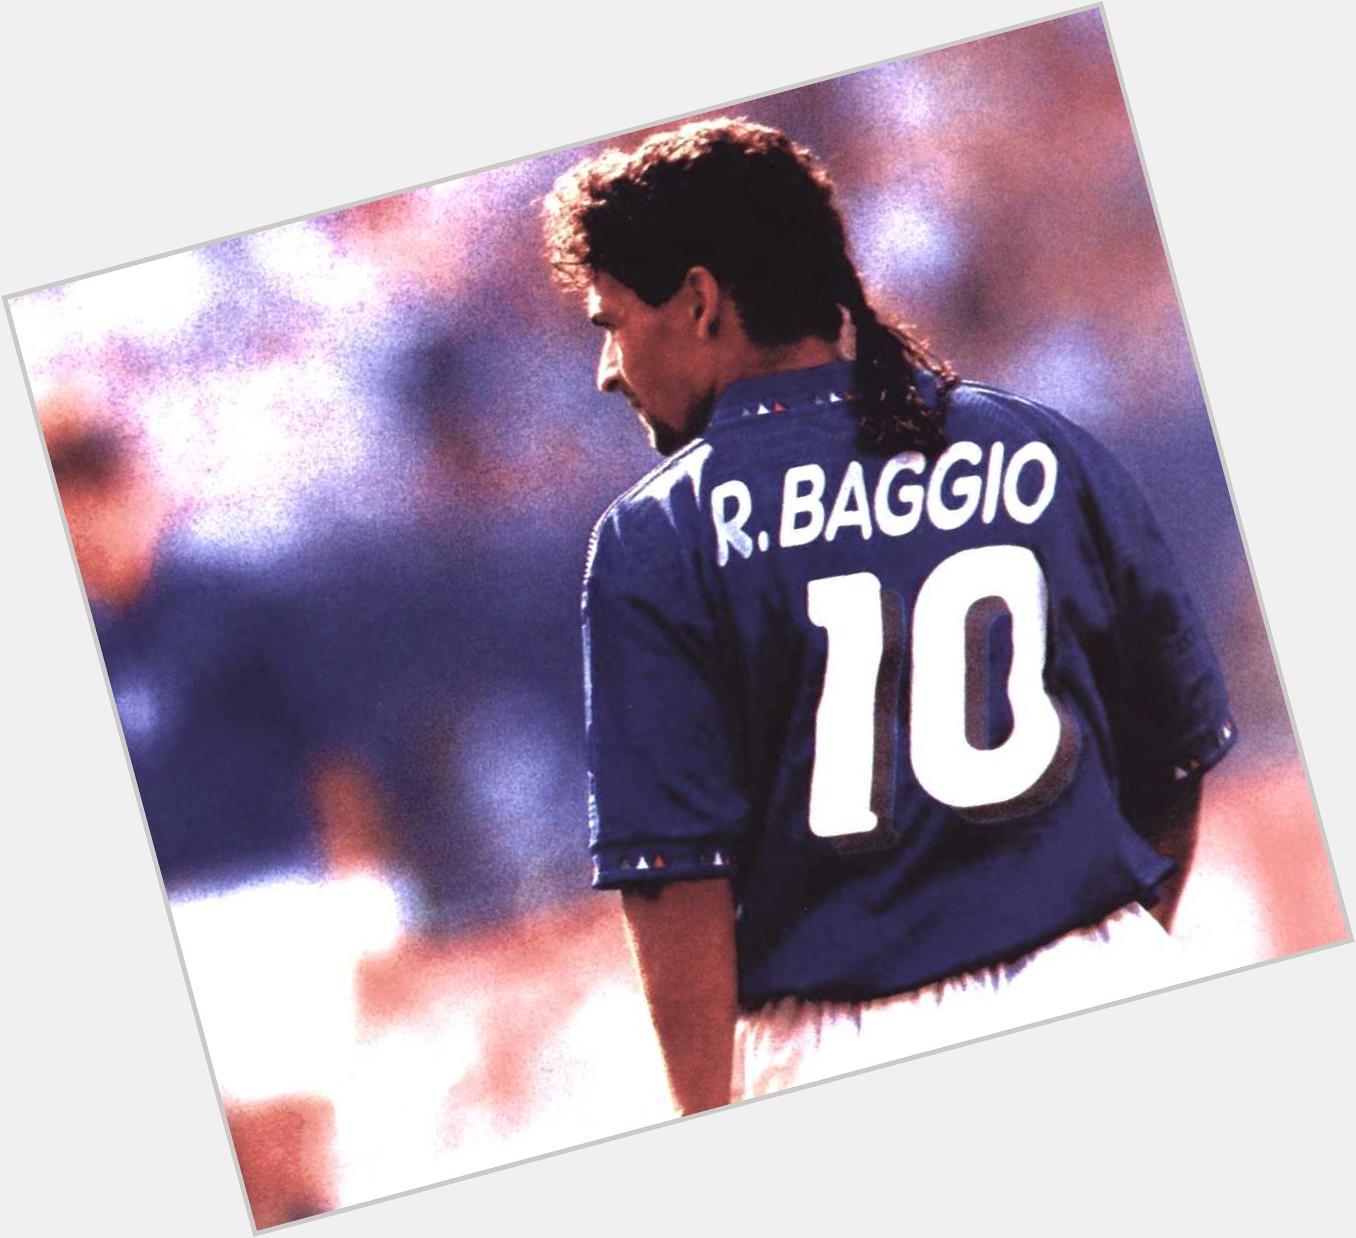 Happy 48th birthday to the greatest Italian player to ever live...Roberto Baggio! 